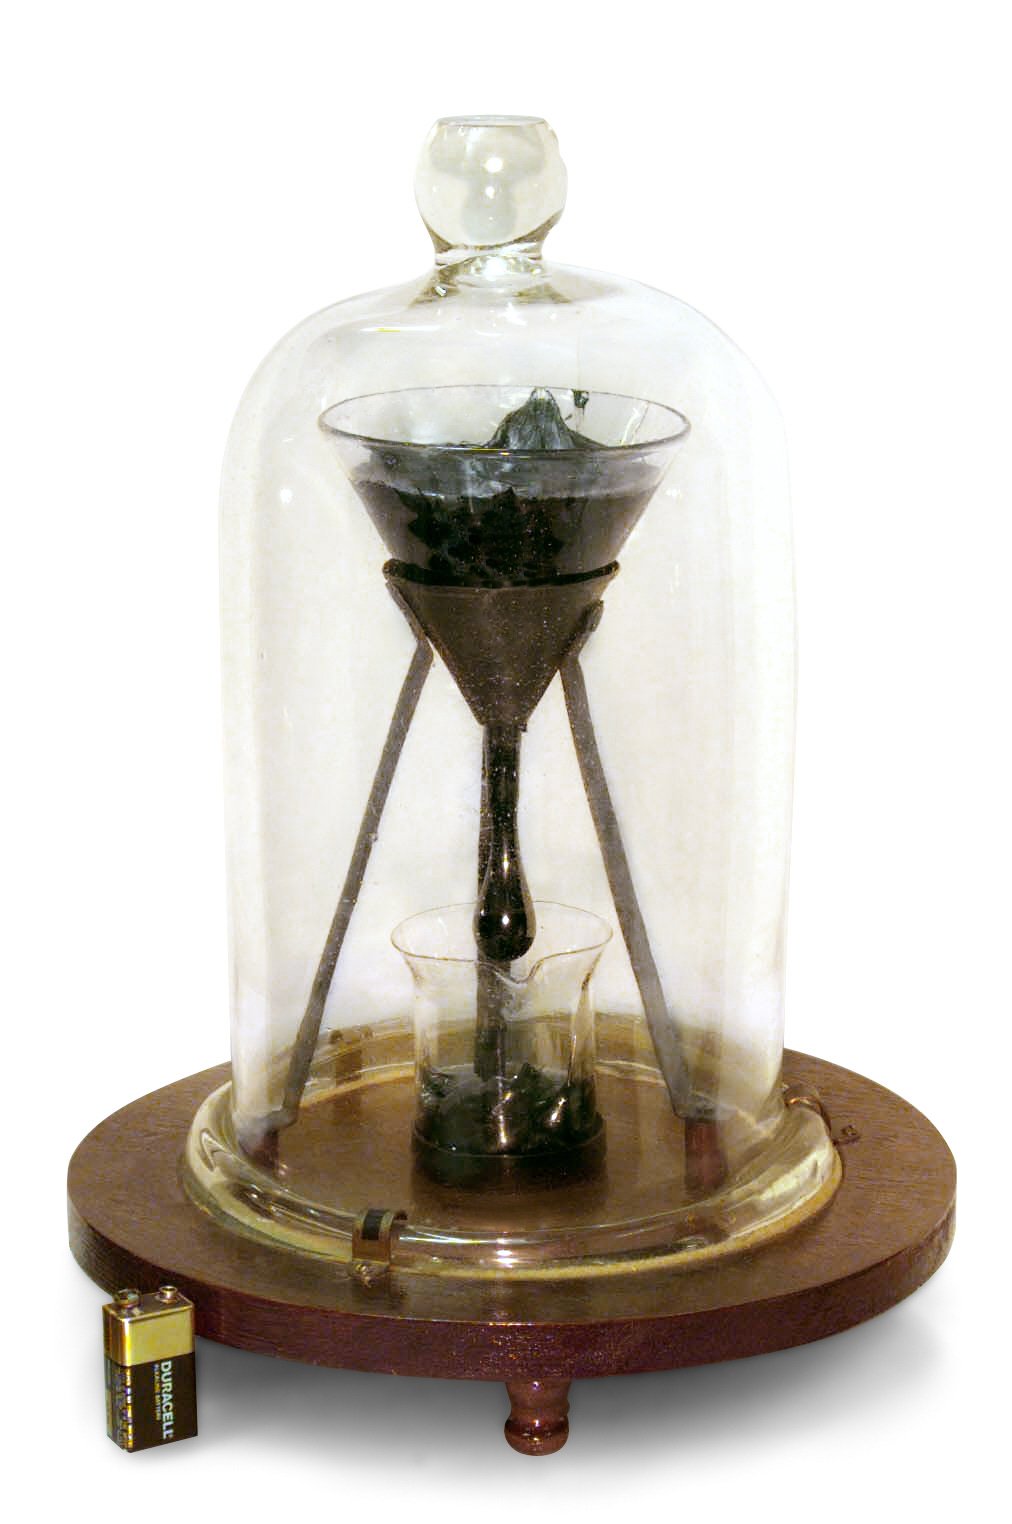 A bell jar containing a funnel containing some dark pitch which is dropping extremely slowly into a smaller jar.